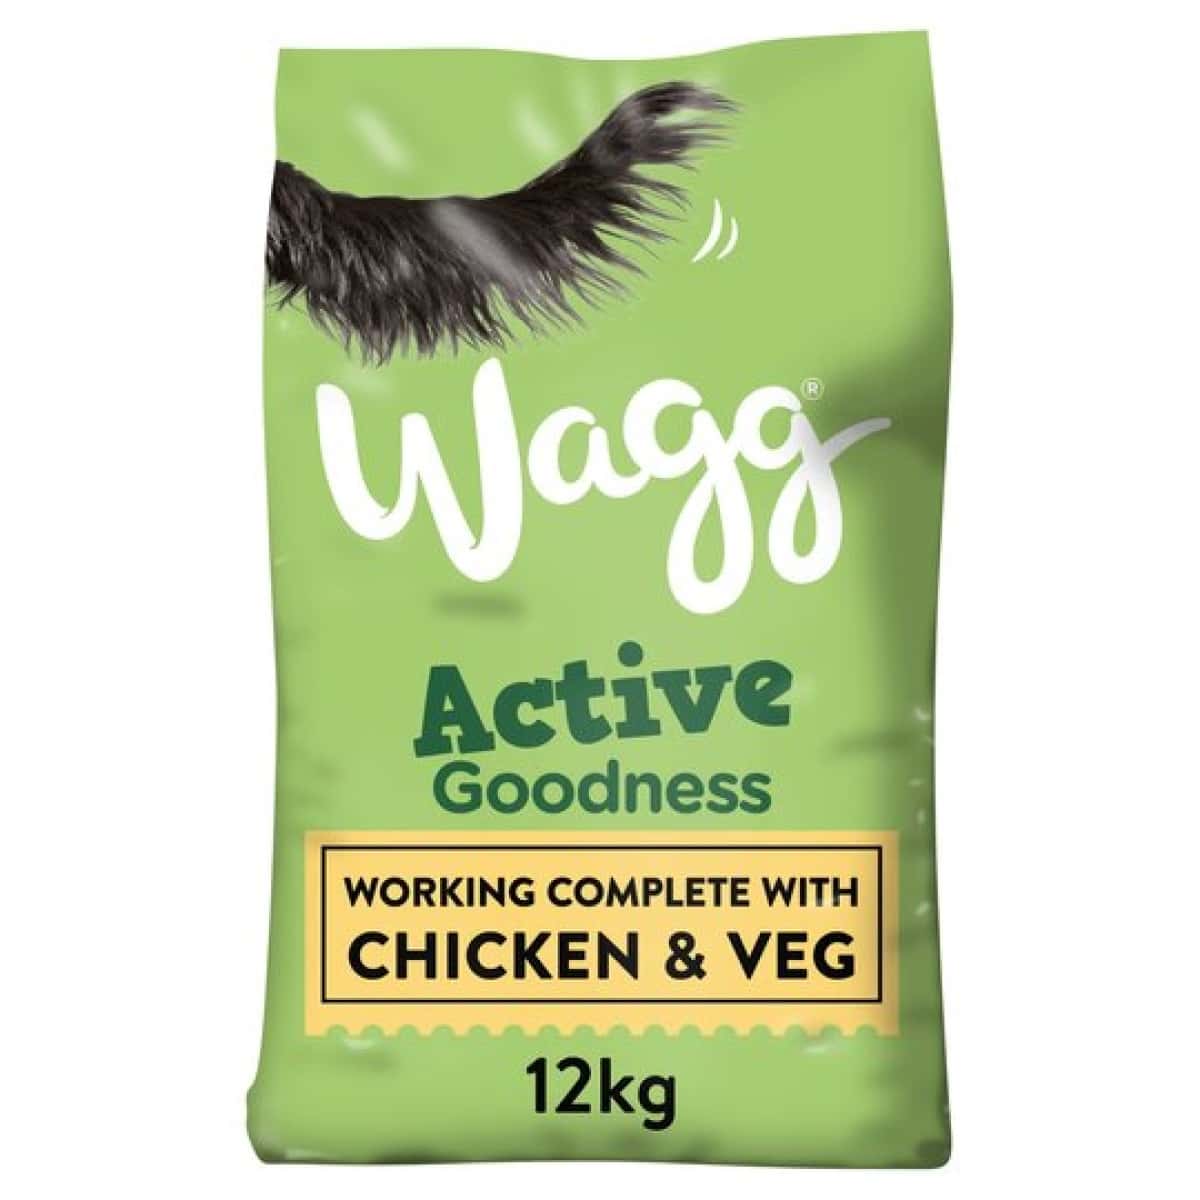 Wagg Active 12kg - Chicken Main Image